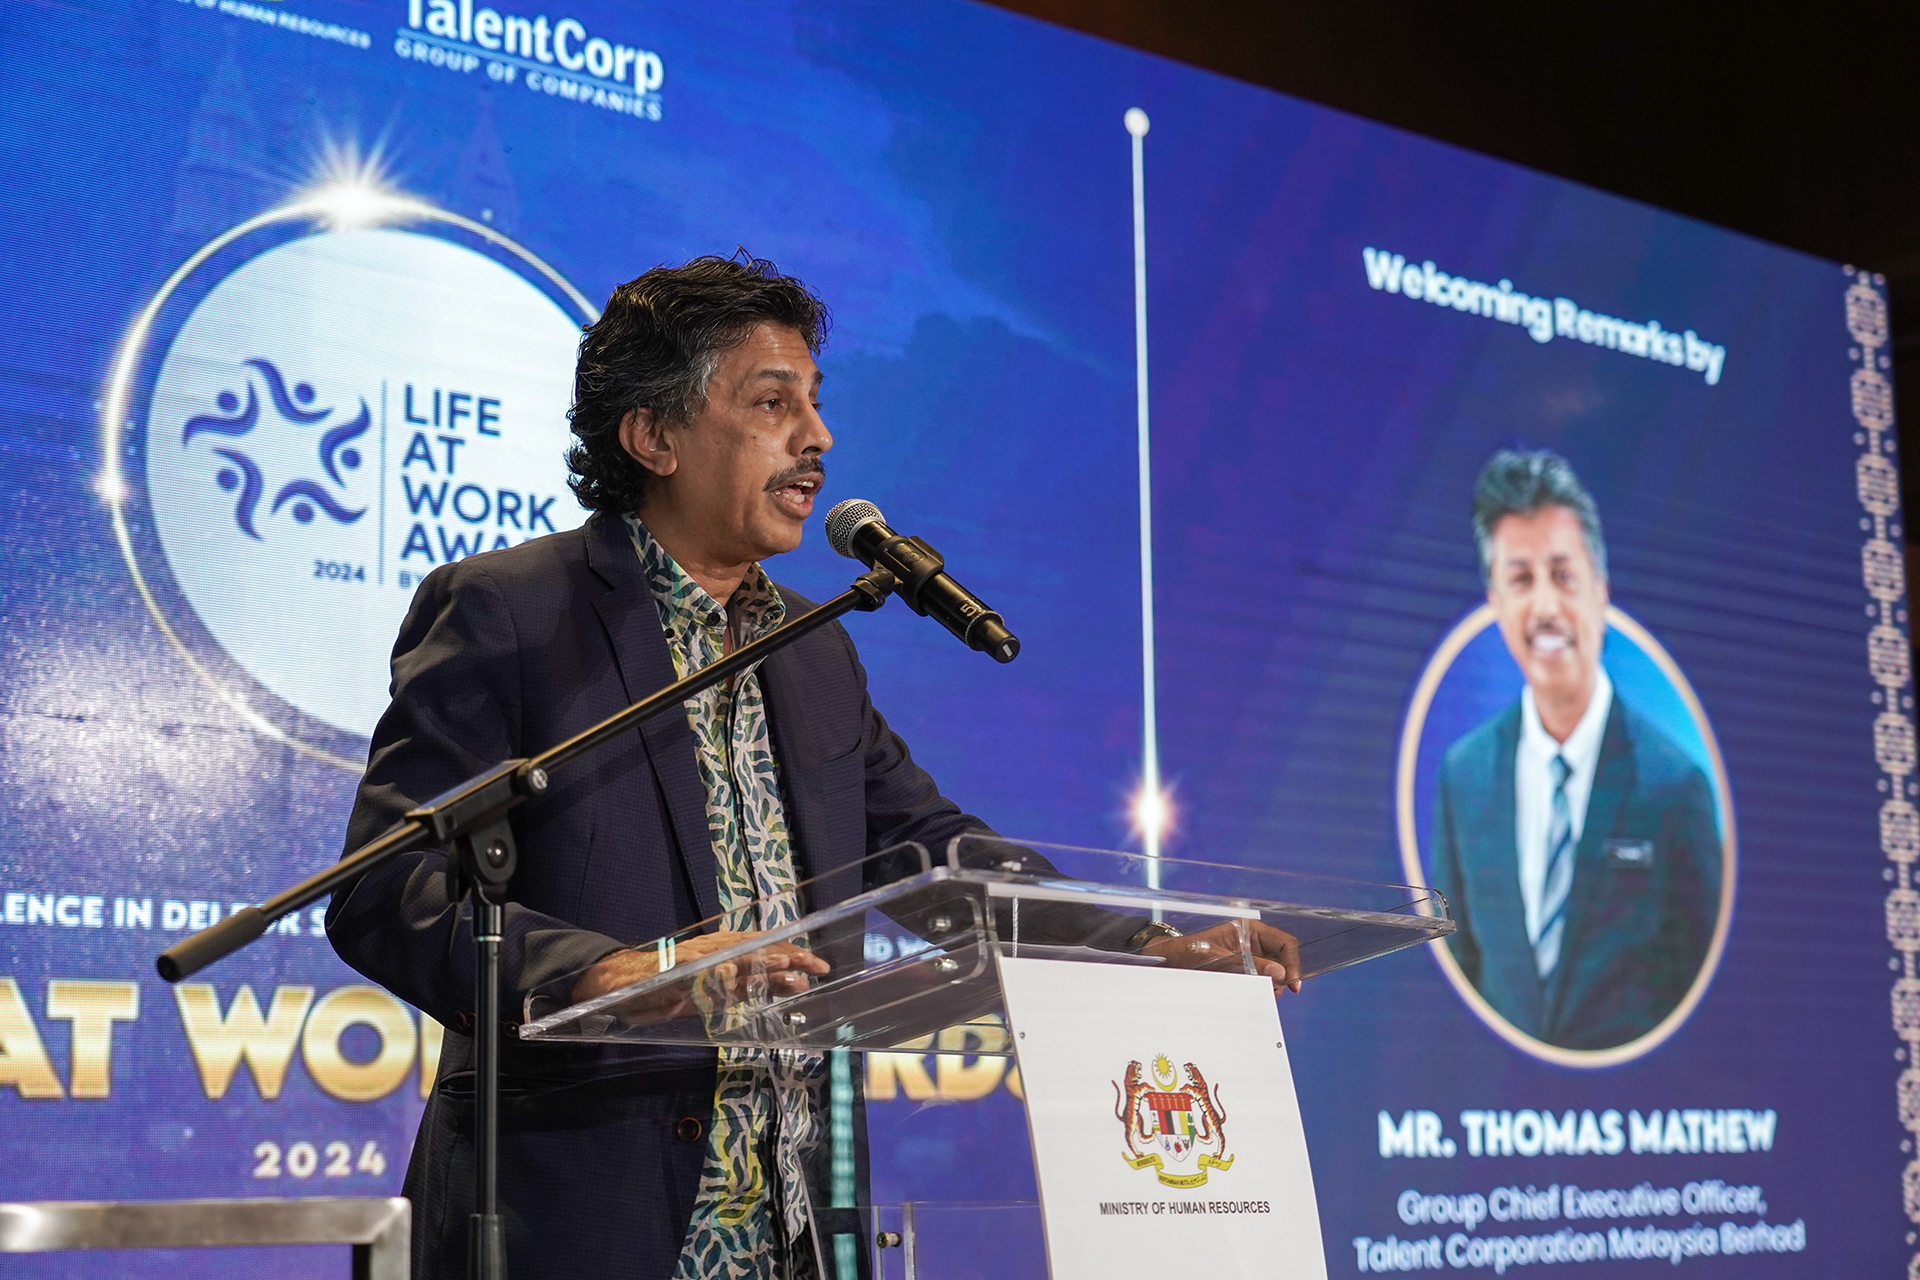 Mr Thomas Mathew, TalentCorp Group CEO delivering his speech during the launch of LIFE AT WORK Awards 2024.